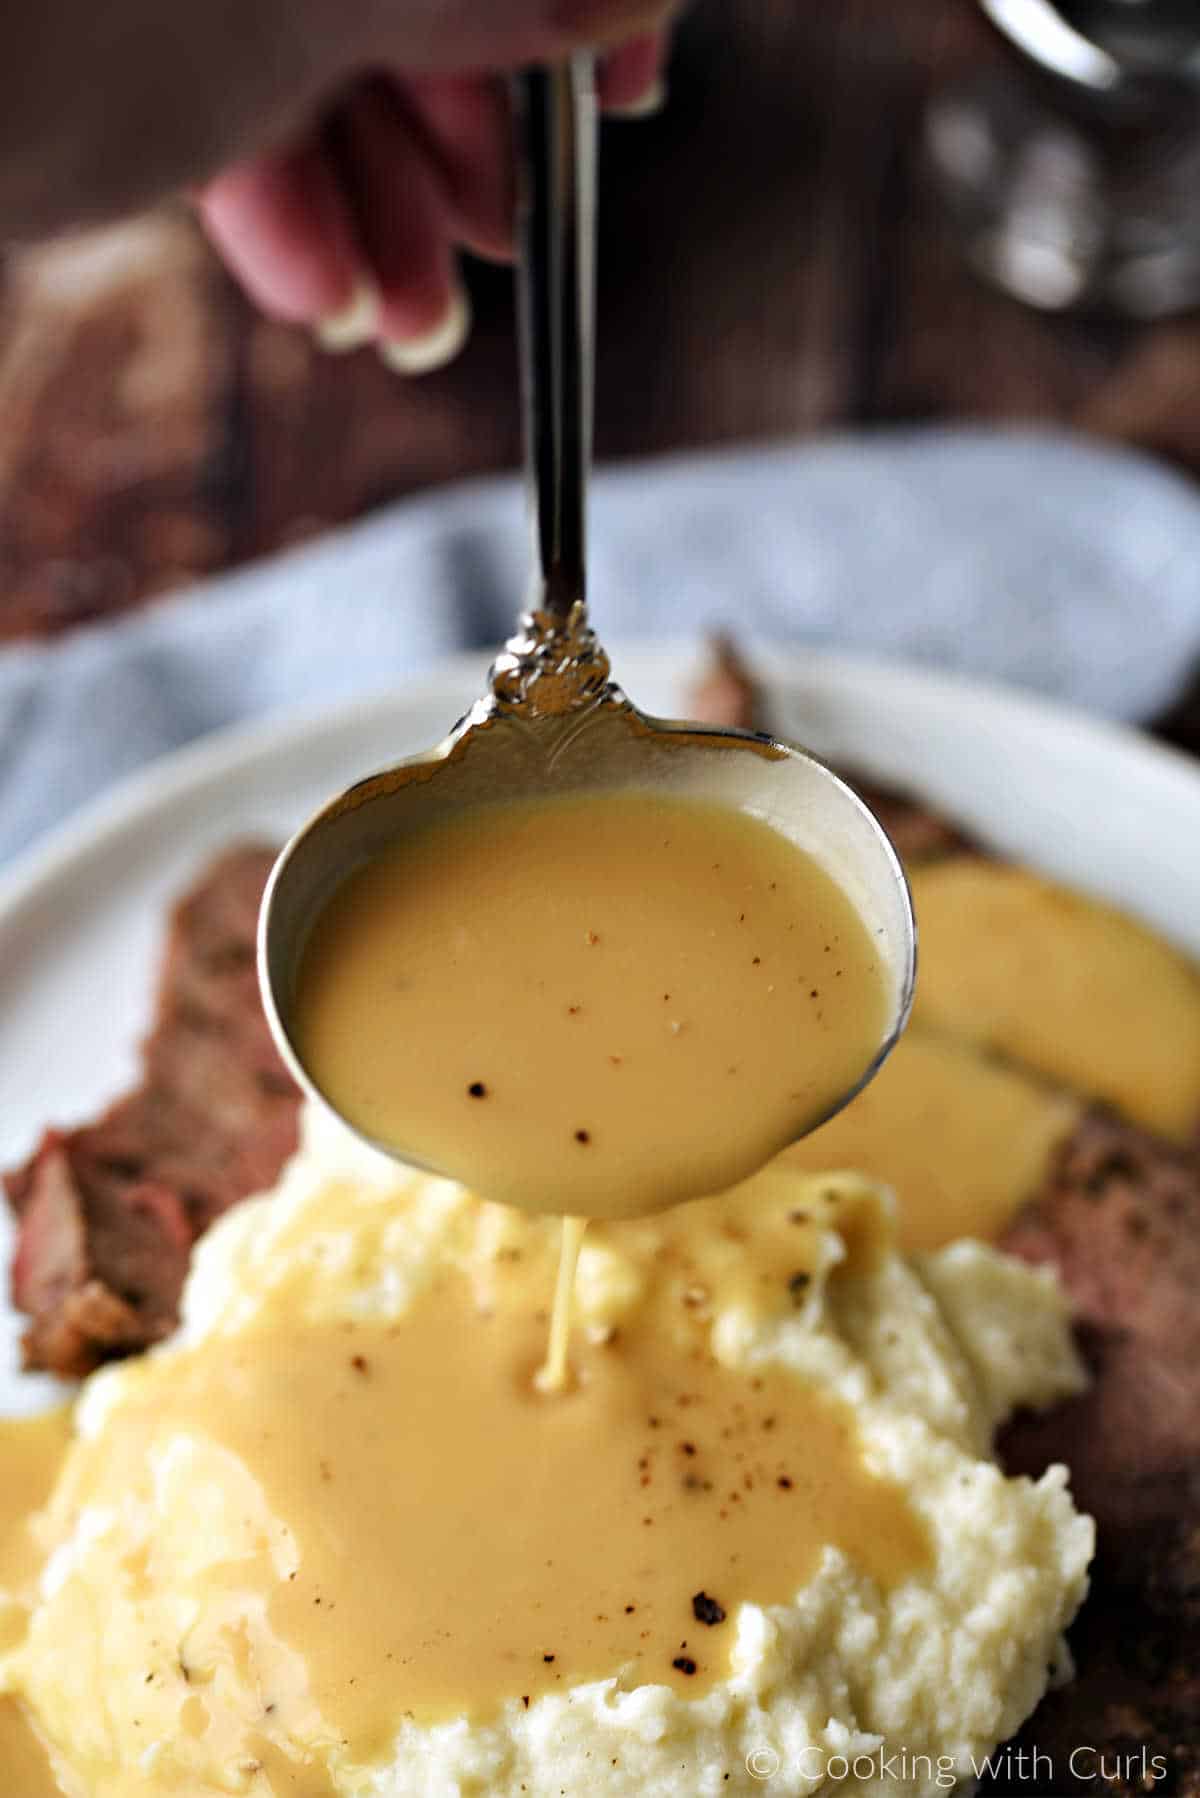 Beef gravy being poured onto mashed cauliflower and slices of roast beef from a silver ladle.